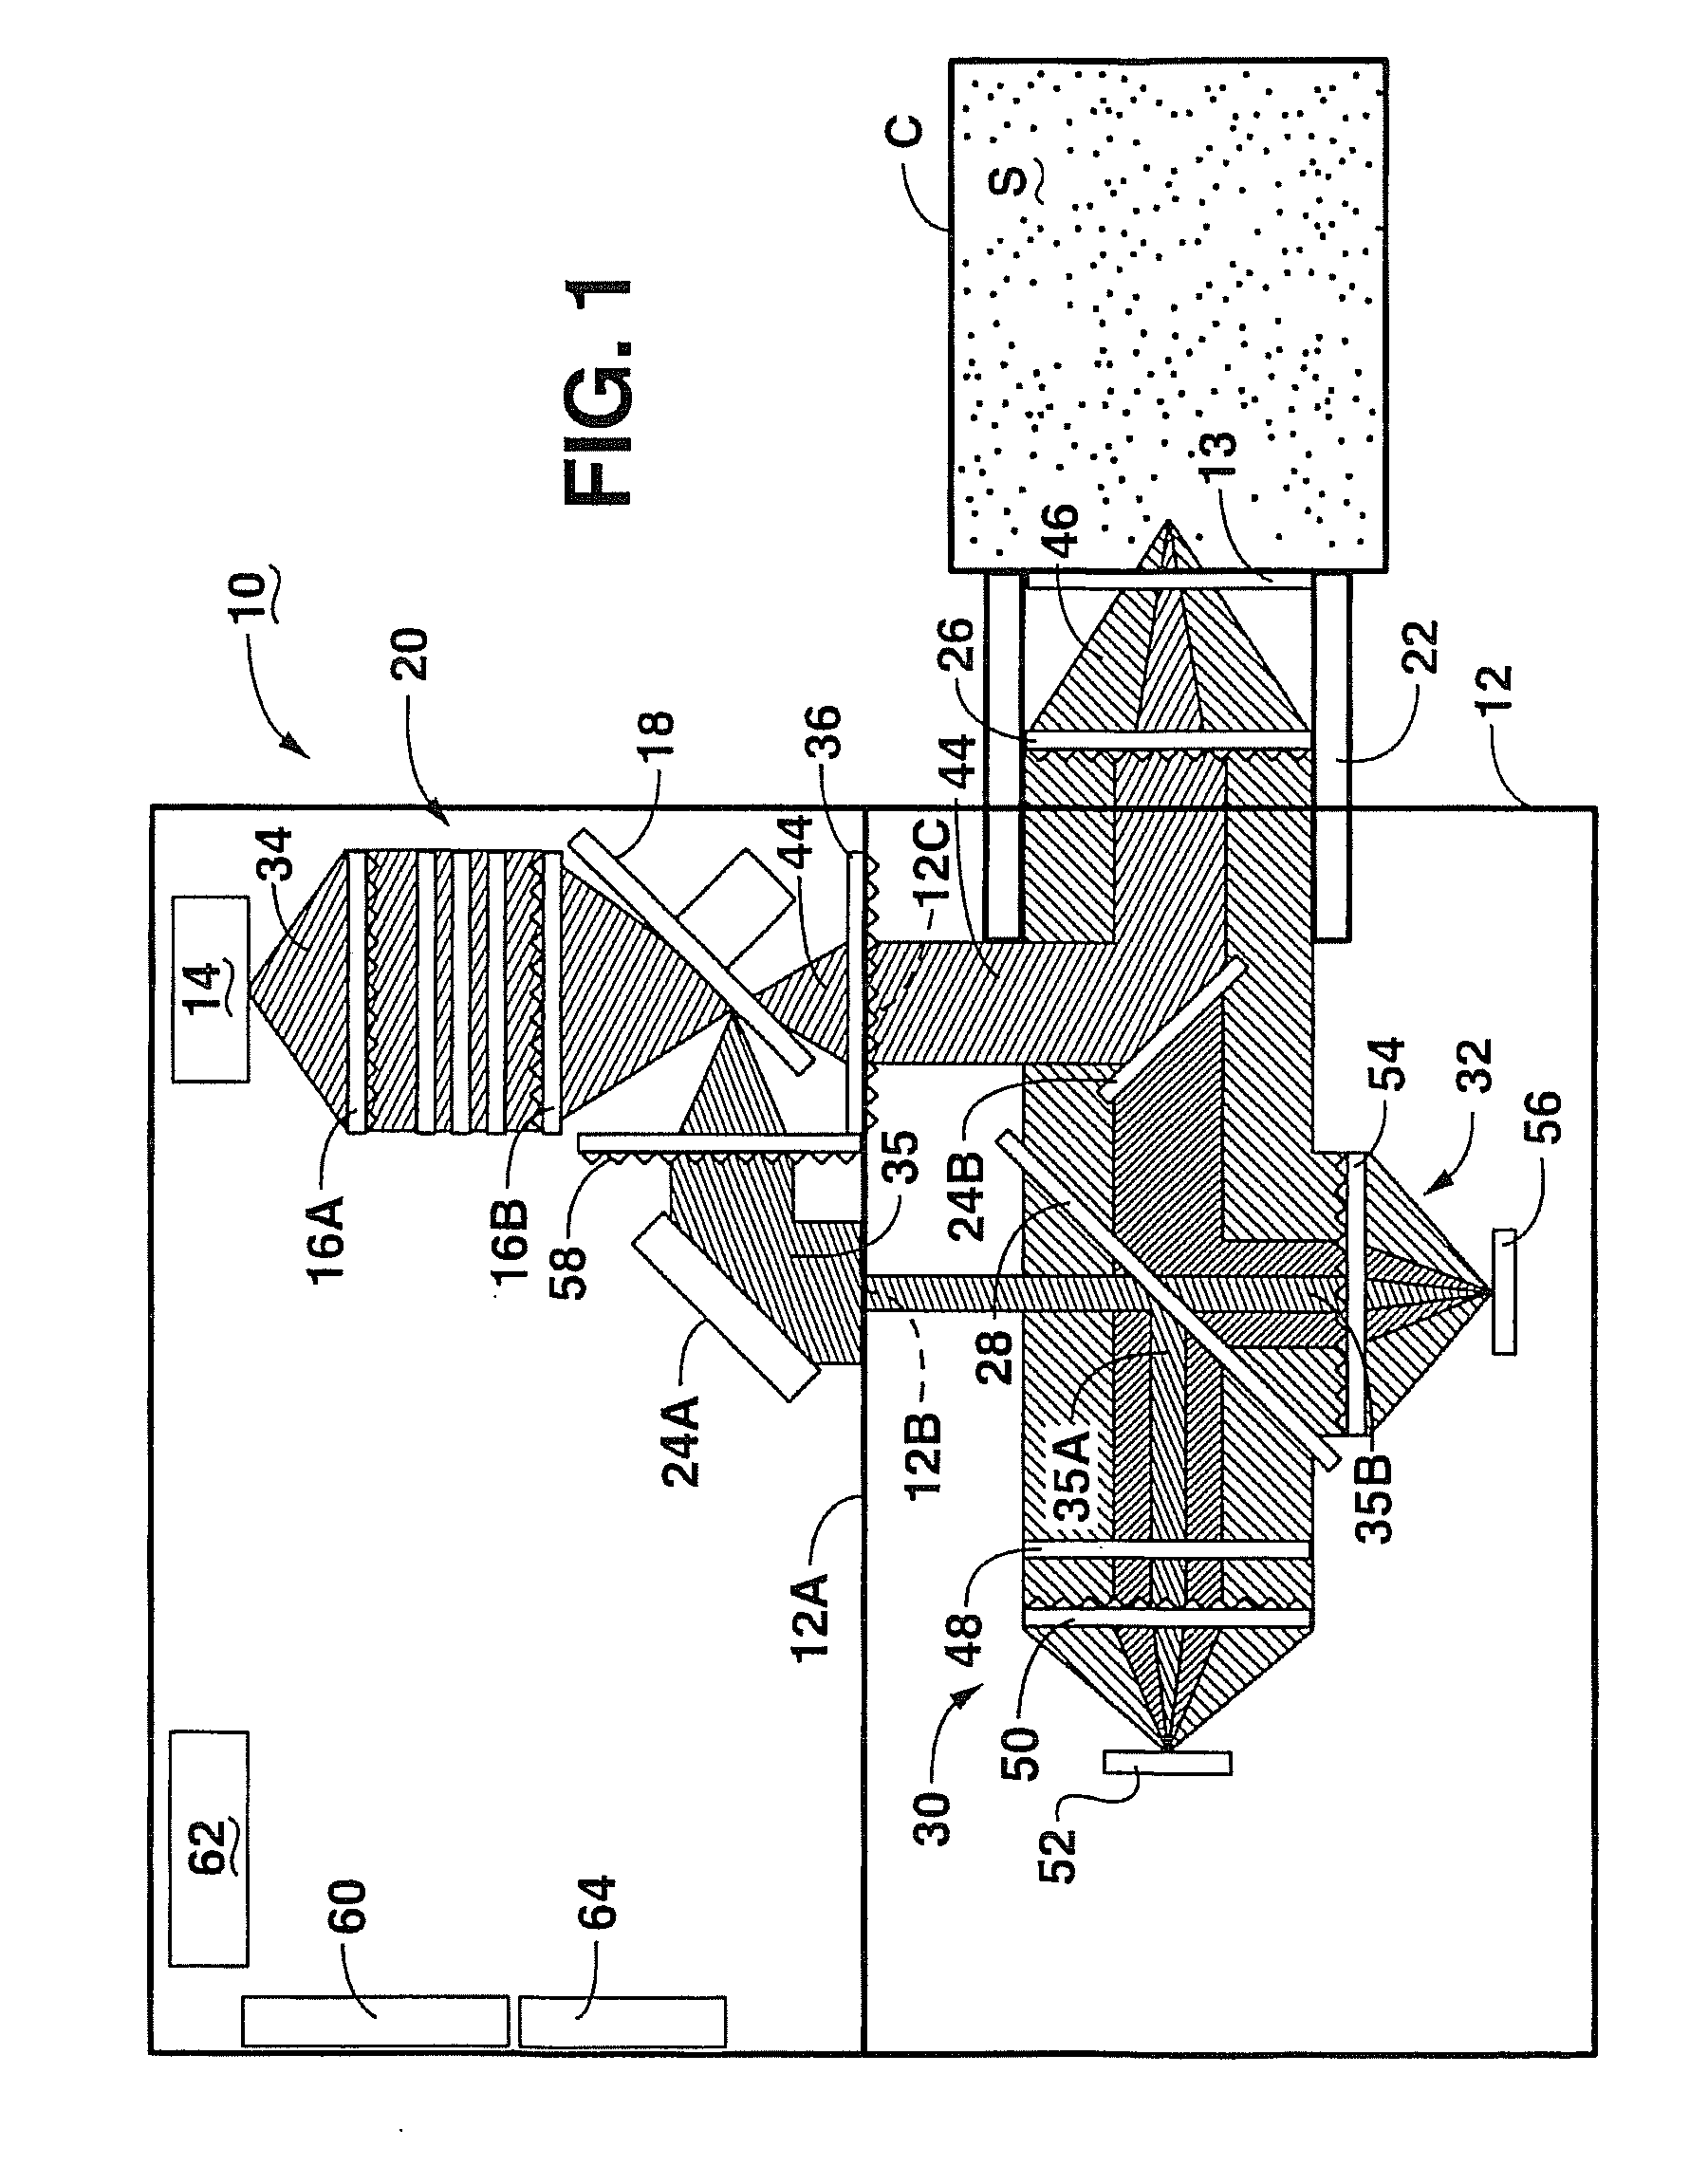 Optical analysis system and methods for operating multivariate optical elements in a normal incidence orientation